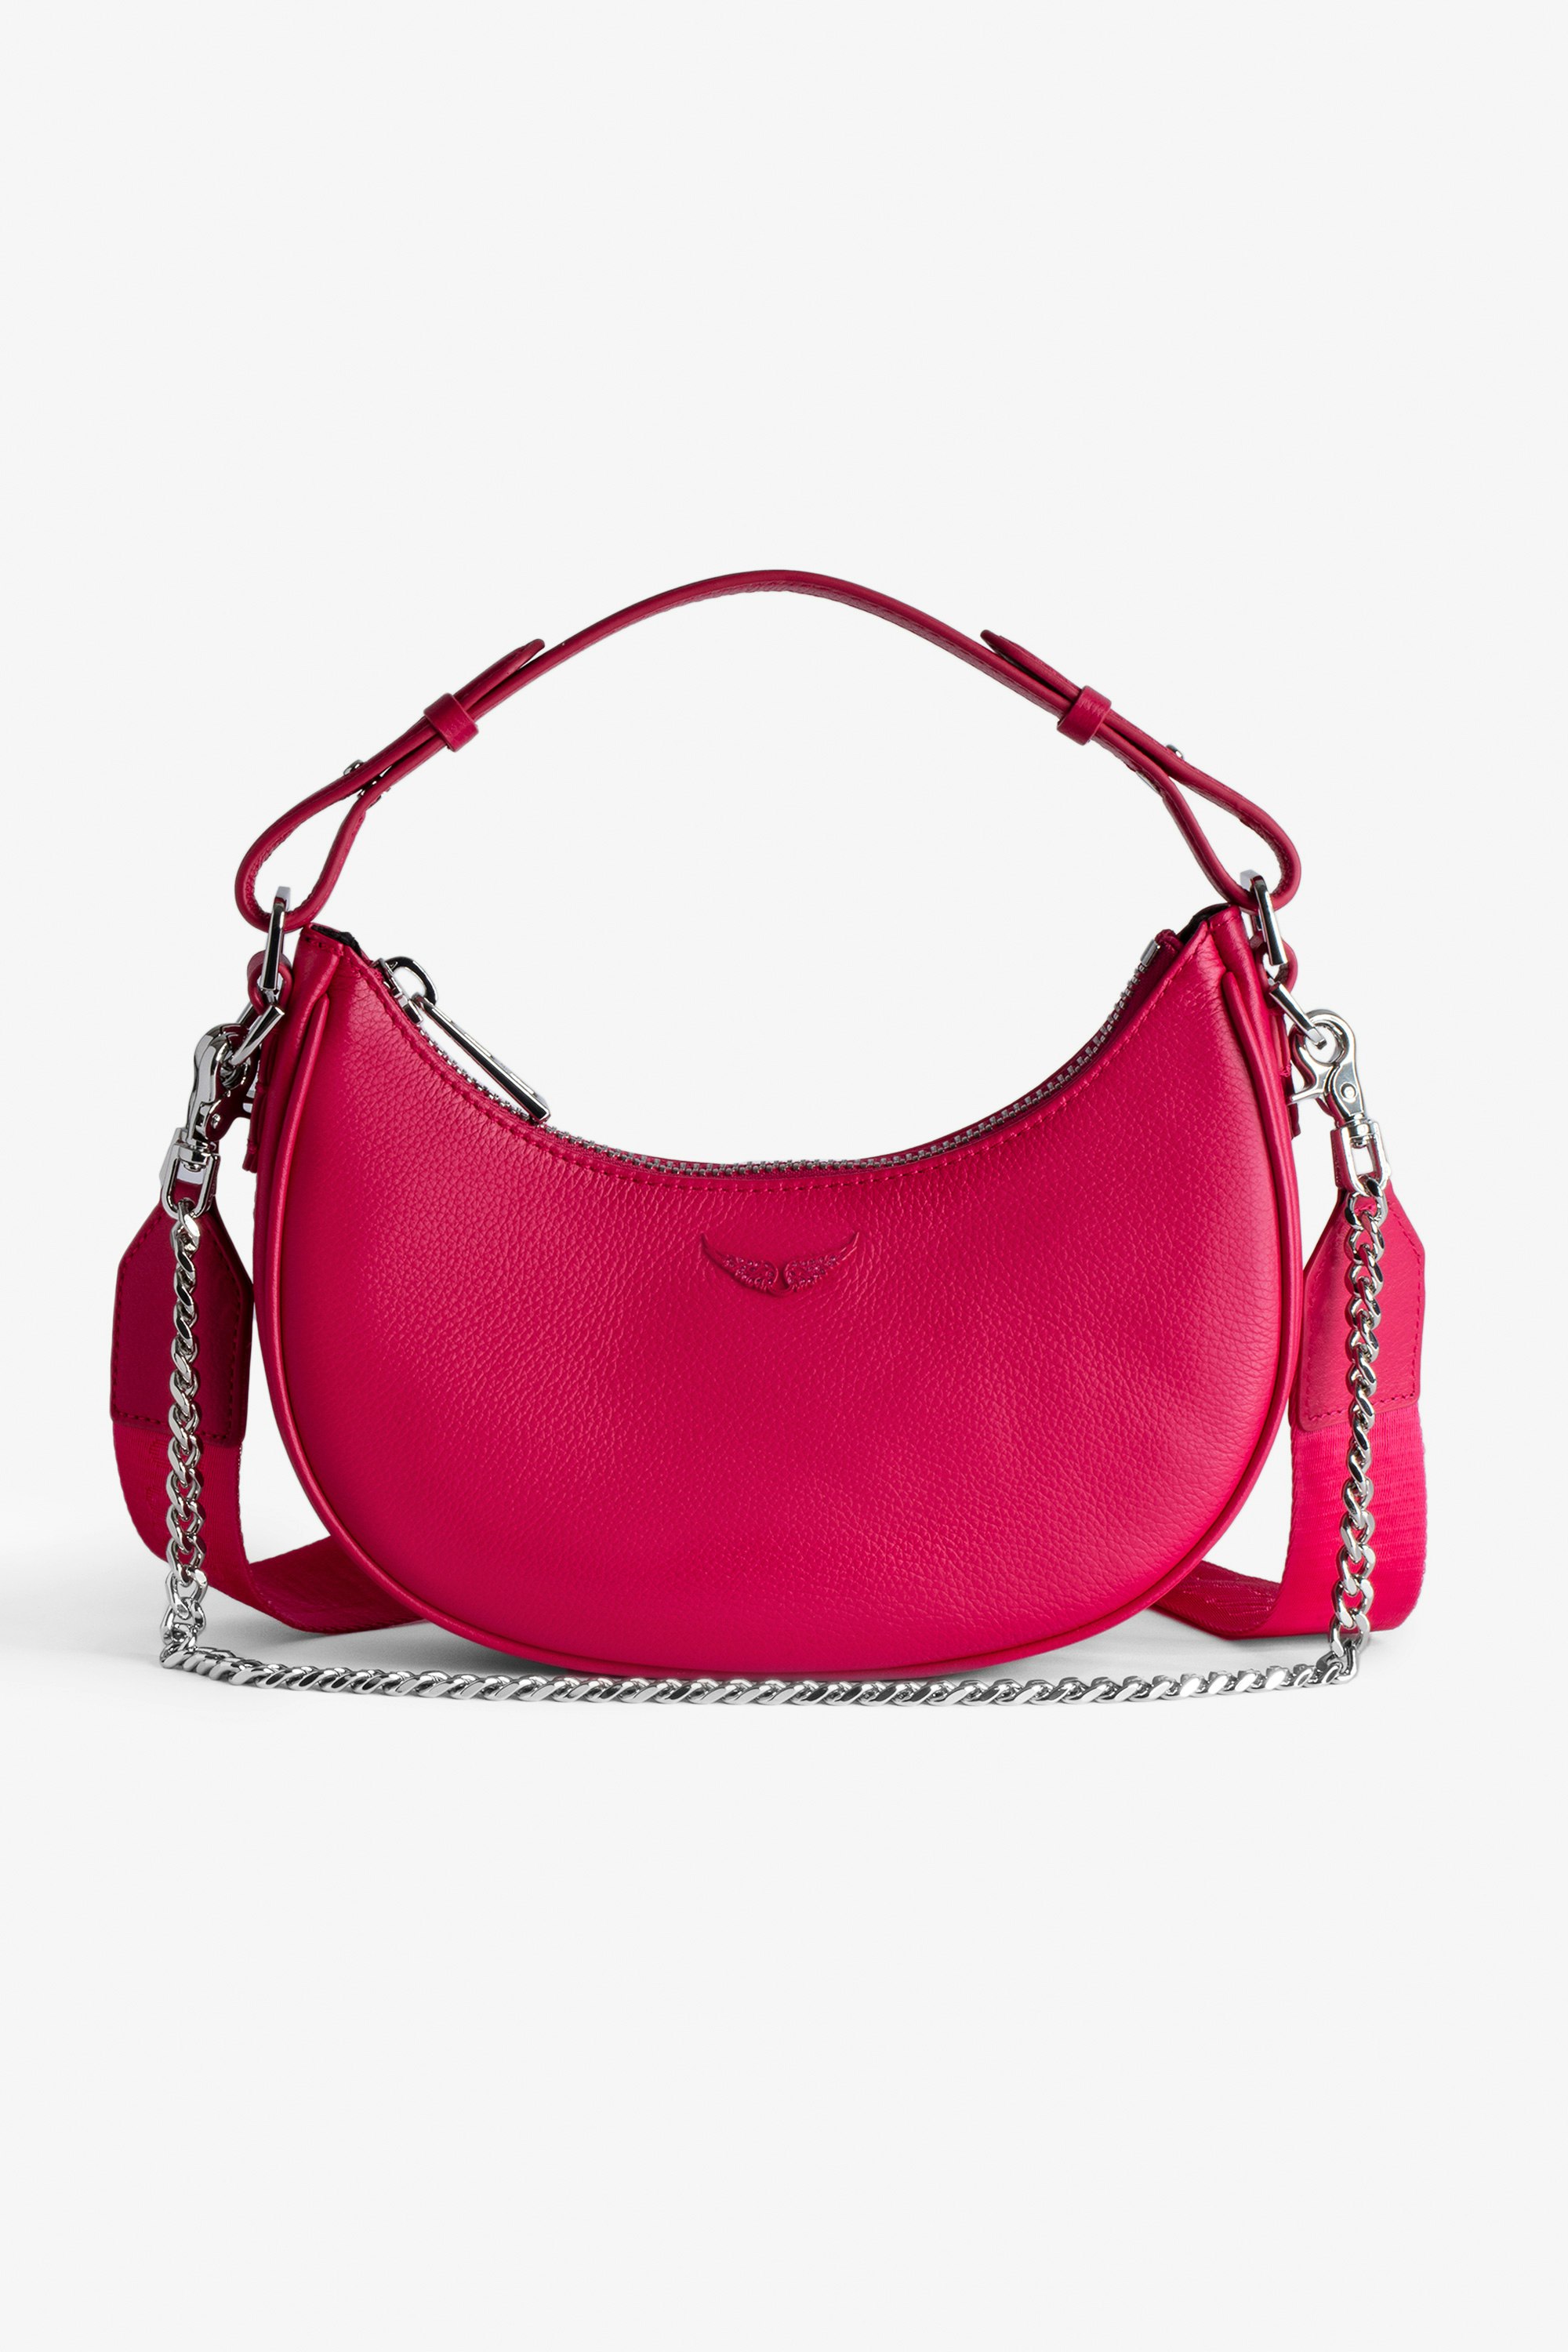 Moonrock bag Women’s half-moon bag in pink grained leather with a short handle, shoulder strap, chain and signature wings.